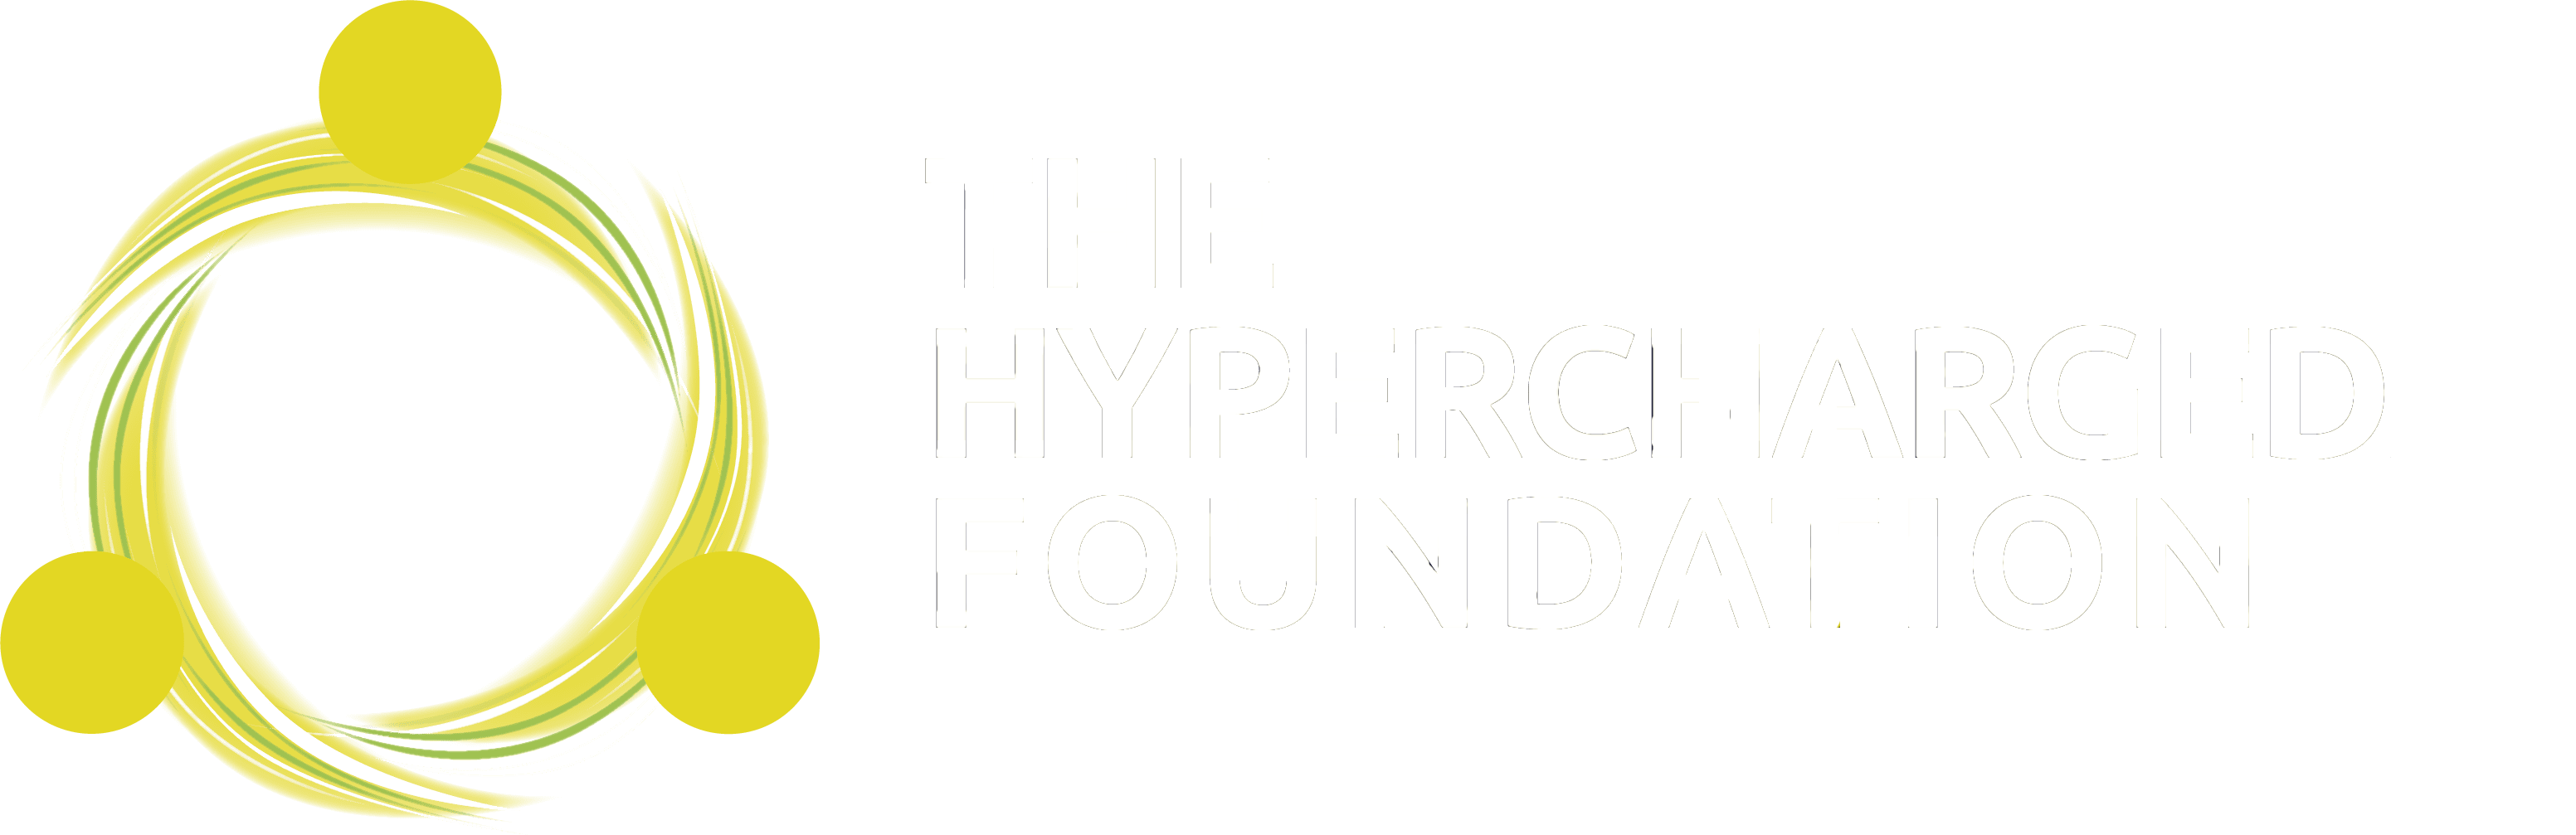 Hypercharged Foundation